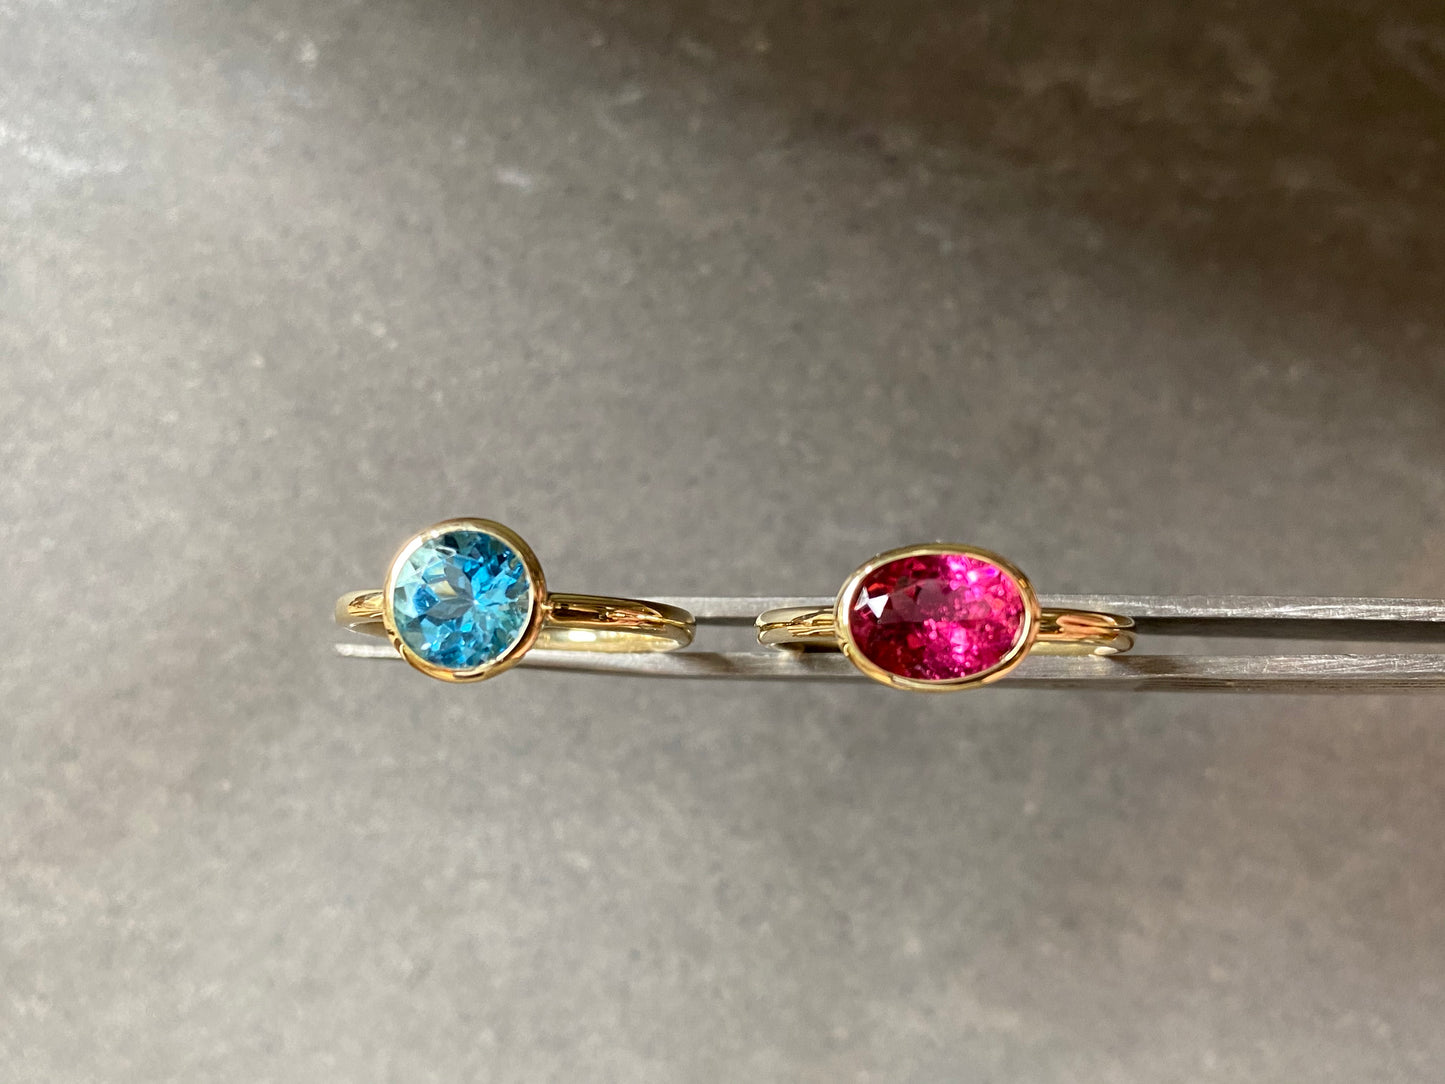 14k yellow gold ring set with a Pink Tourmaline